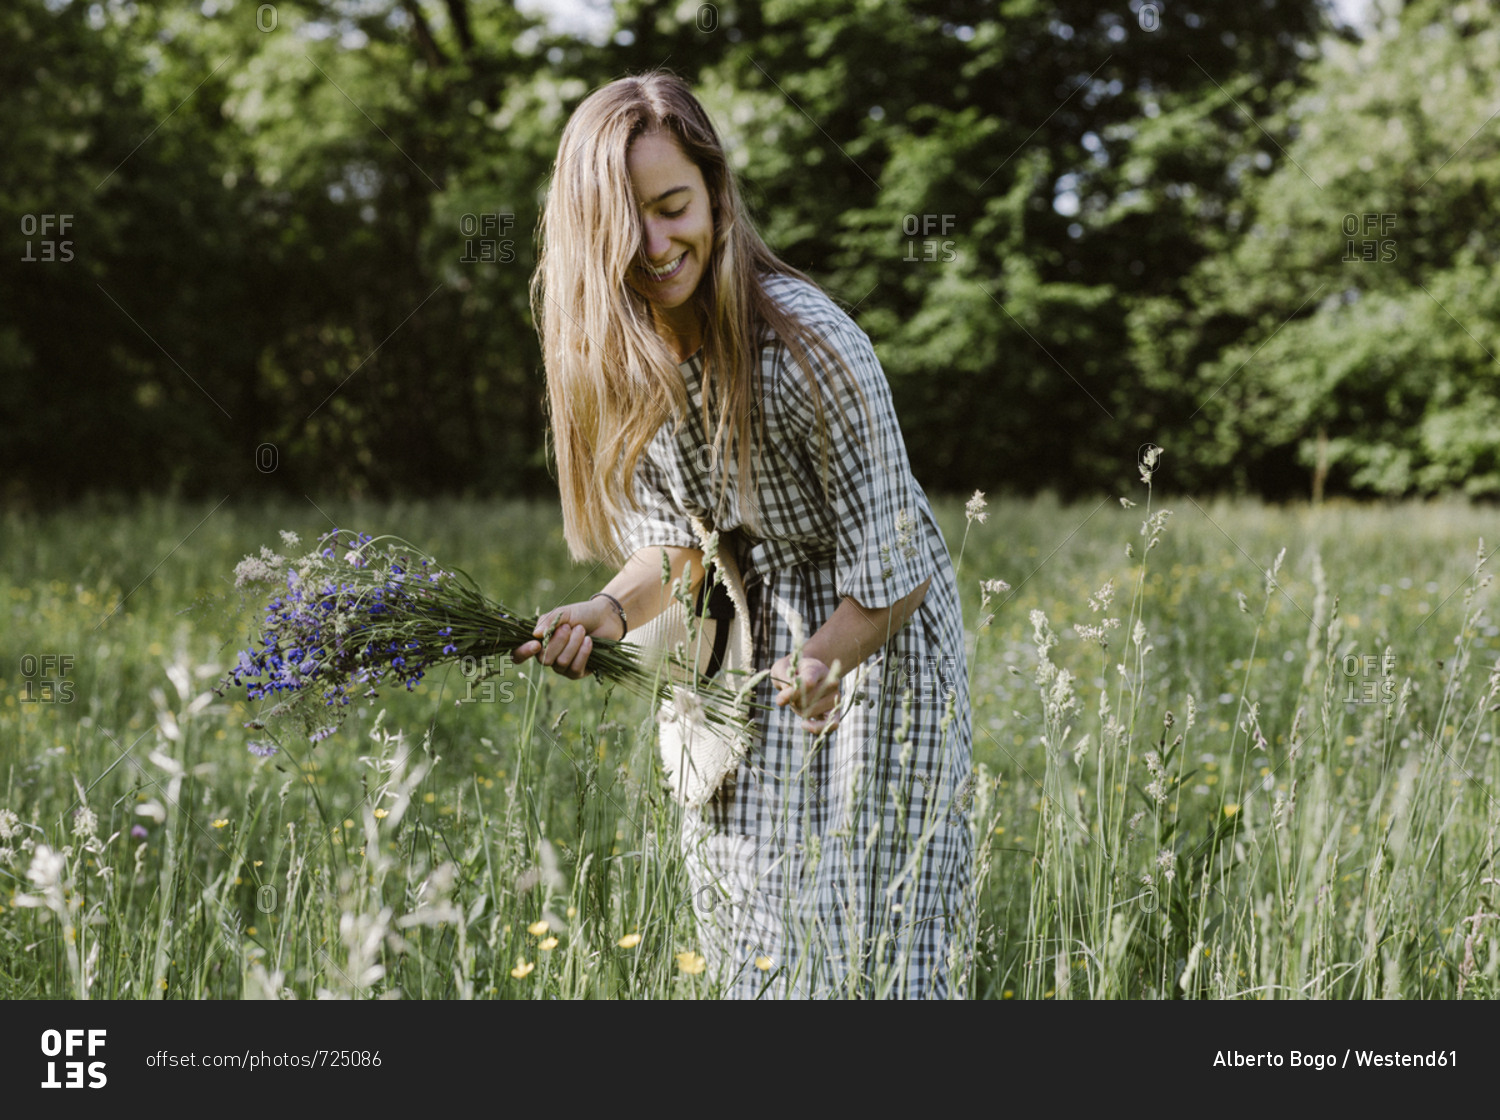 Italy, Veneto, Young woman plucking flowers and herbs in field